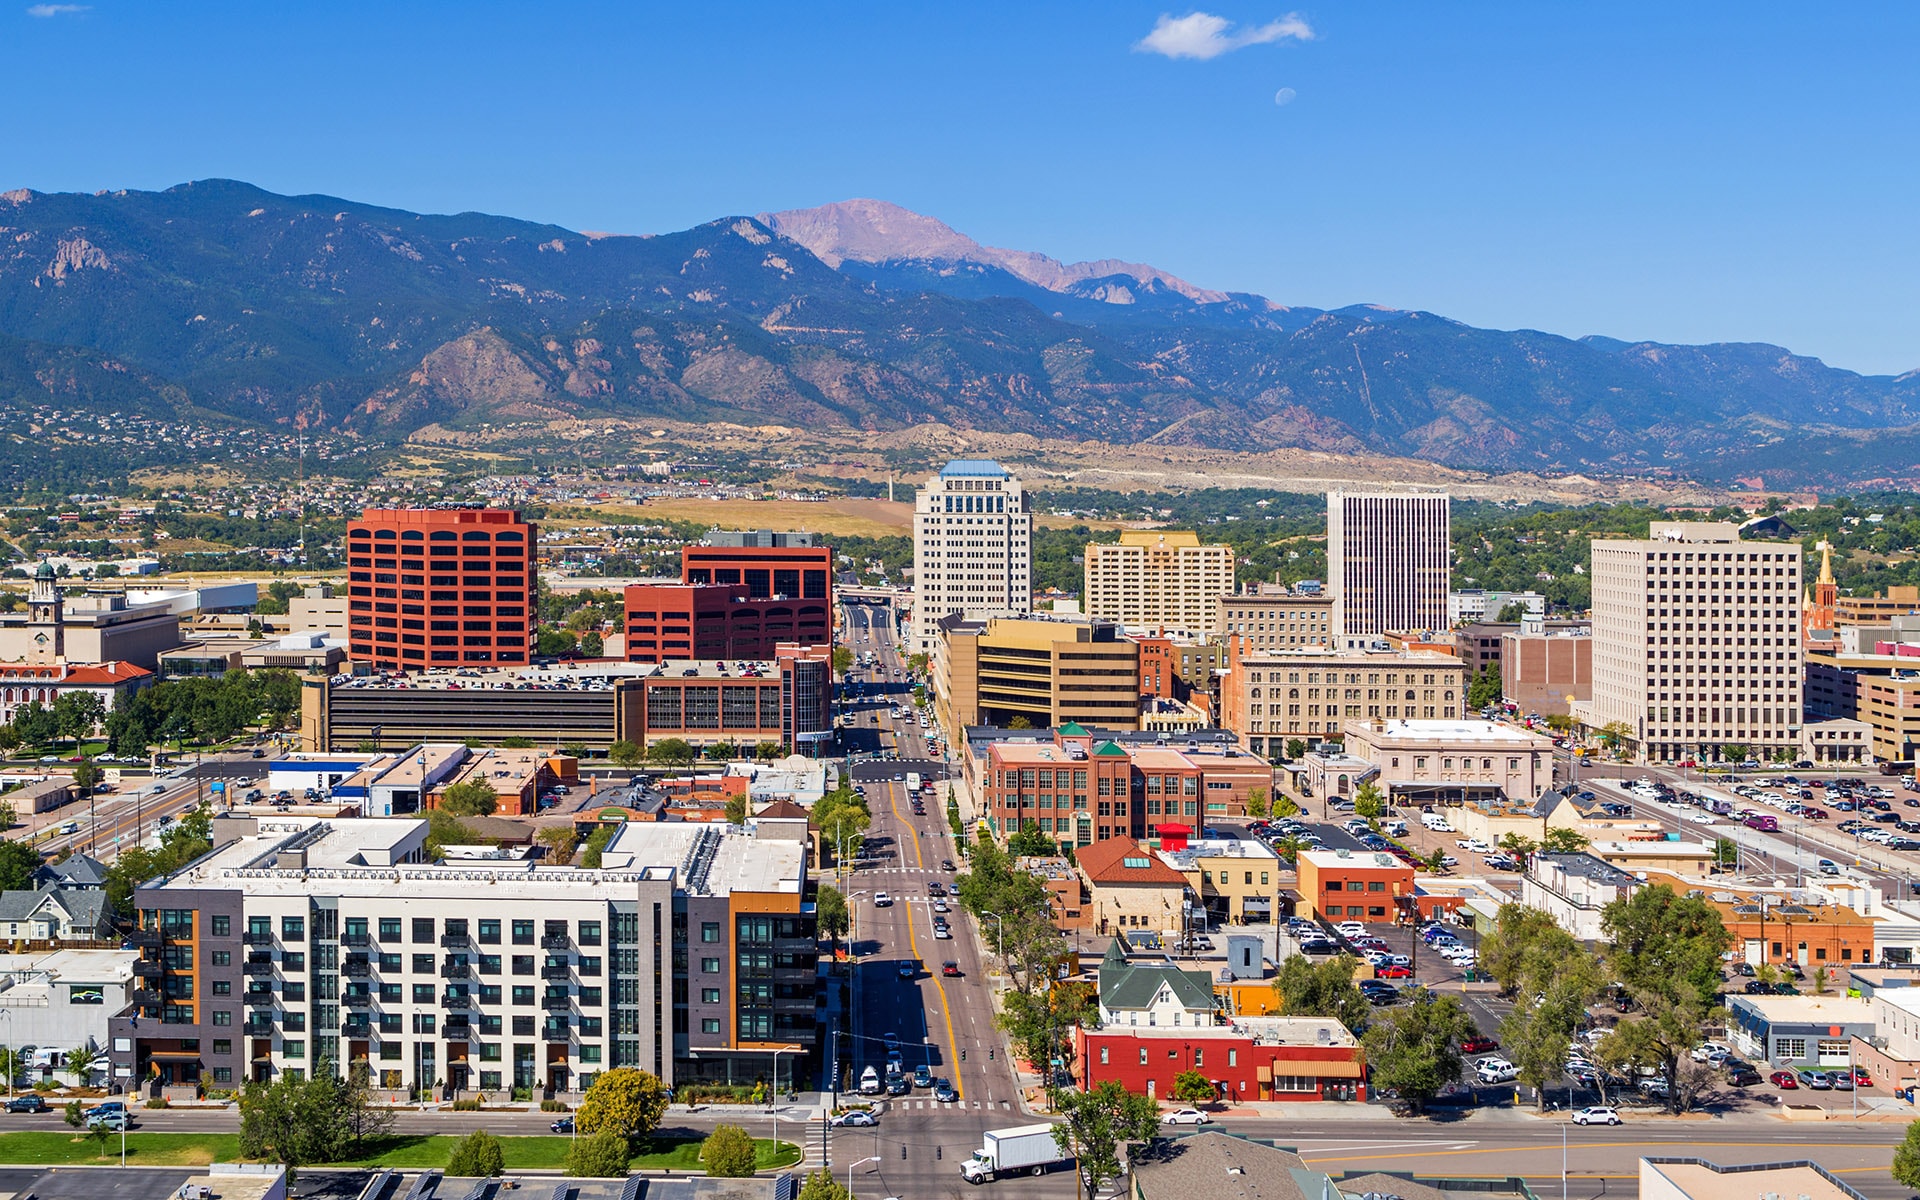 Aerial view of downtown Colorado Springs, Colorado in the foreground with mountains and blue sky in the background